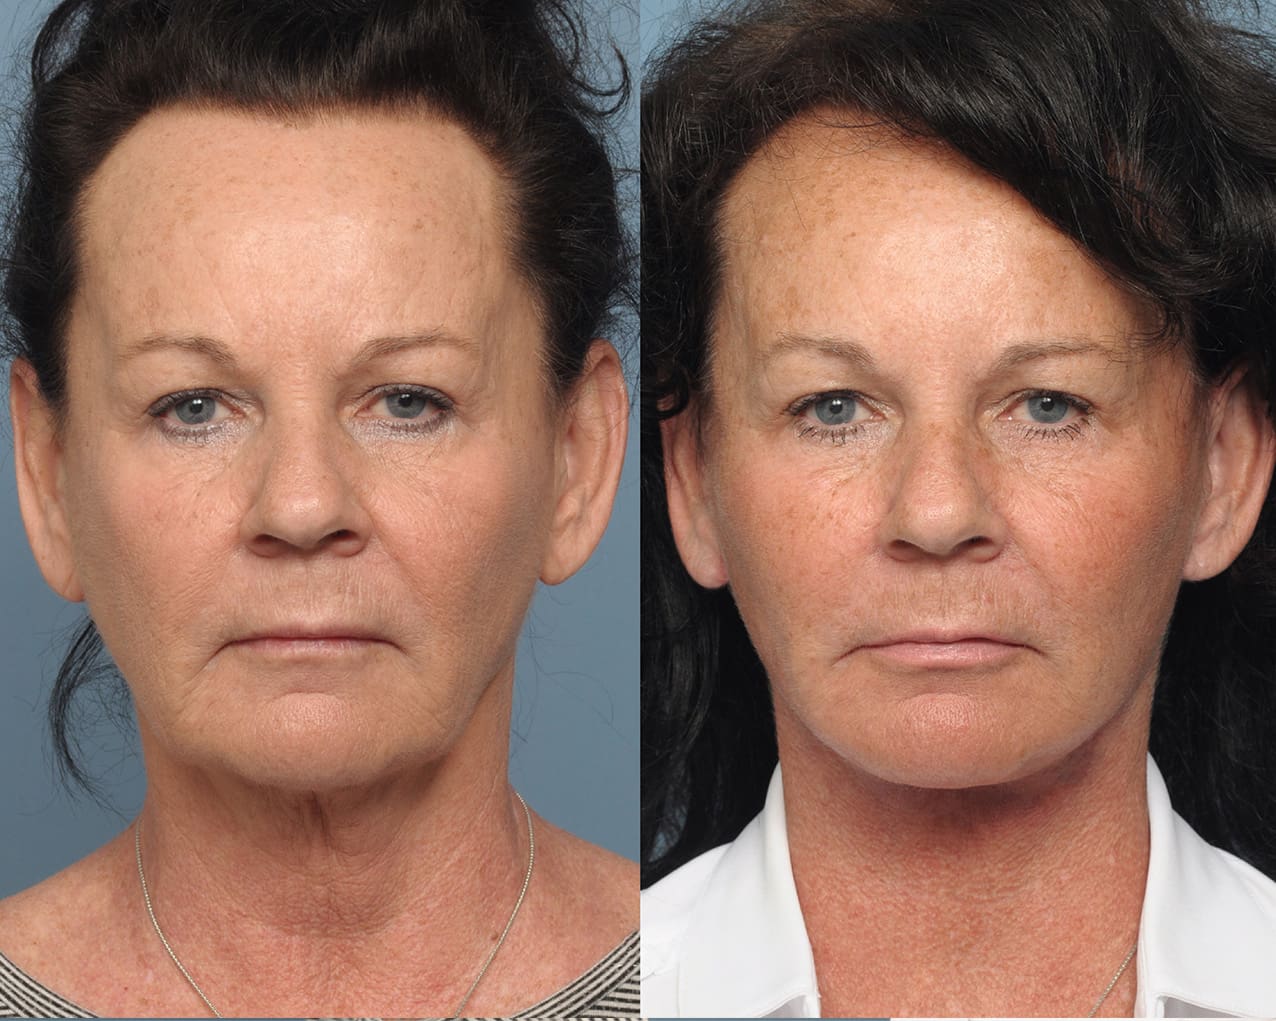 FACELIFT & NECK LIFT SURGERY: WHAT IT IS AND WHAT TO EXPECT